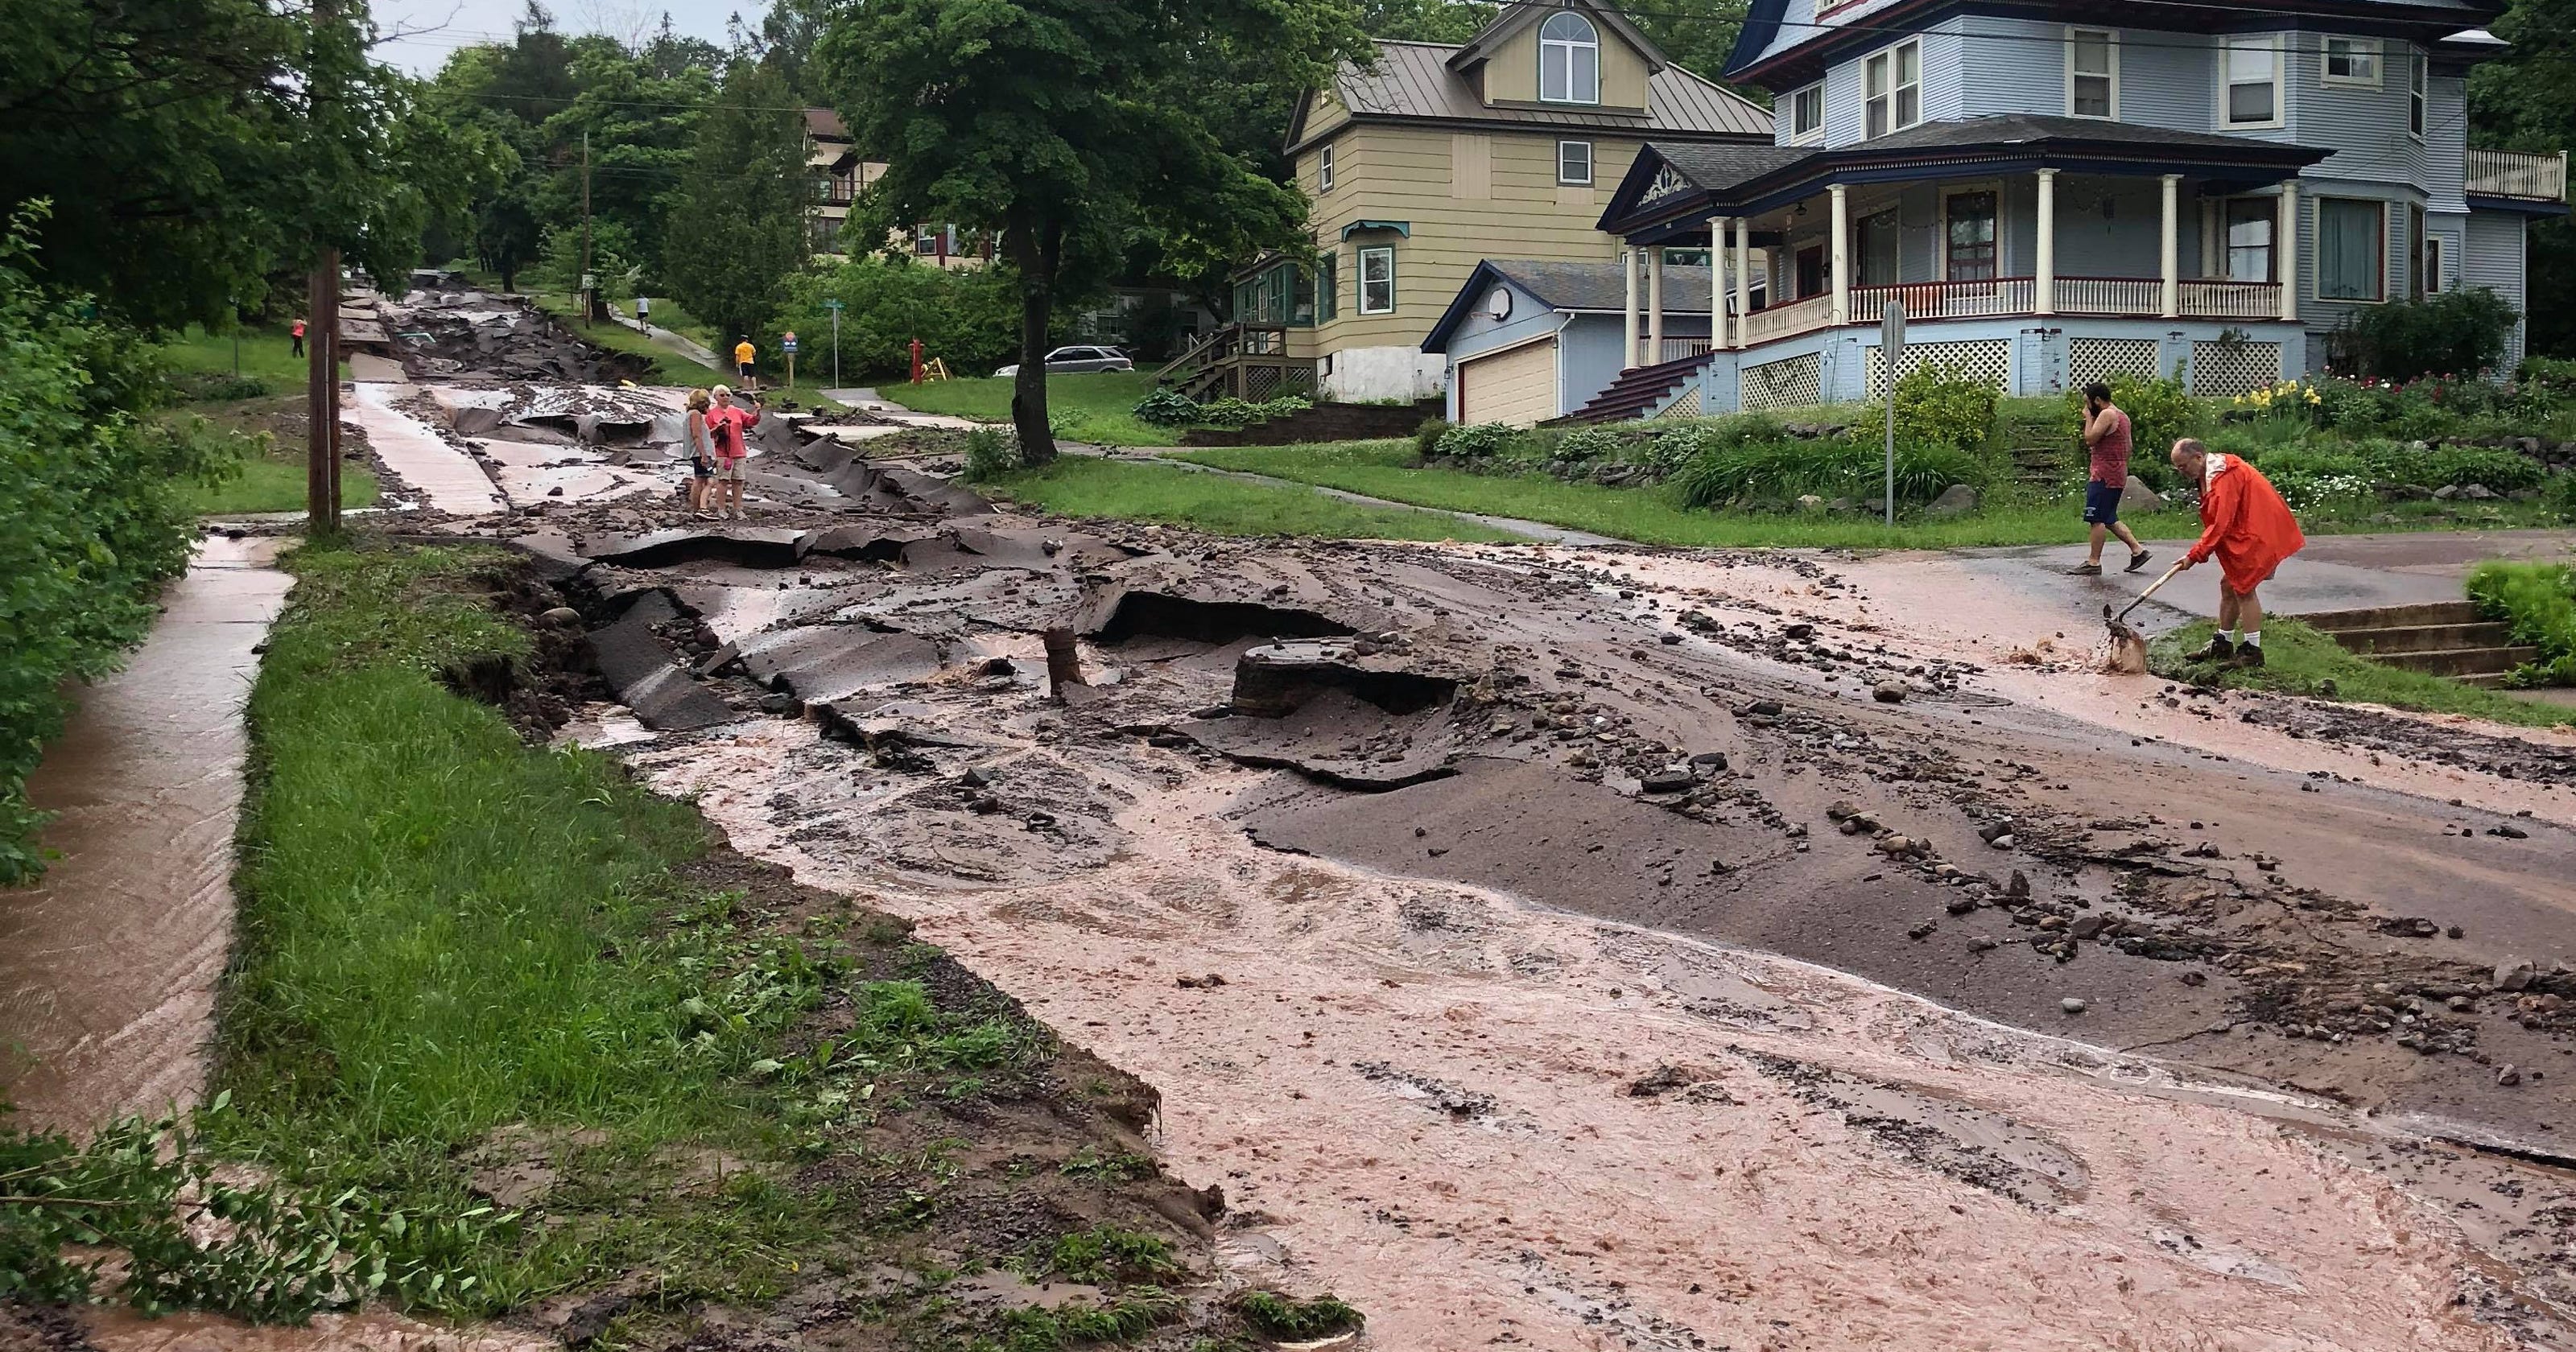 Mackinac Island rallies to fundraise for Upper Peninsula after flooding - Detroit Free Press